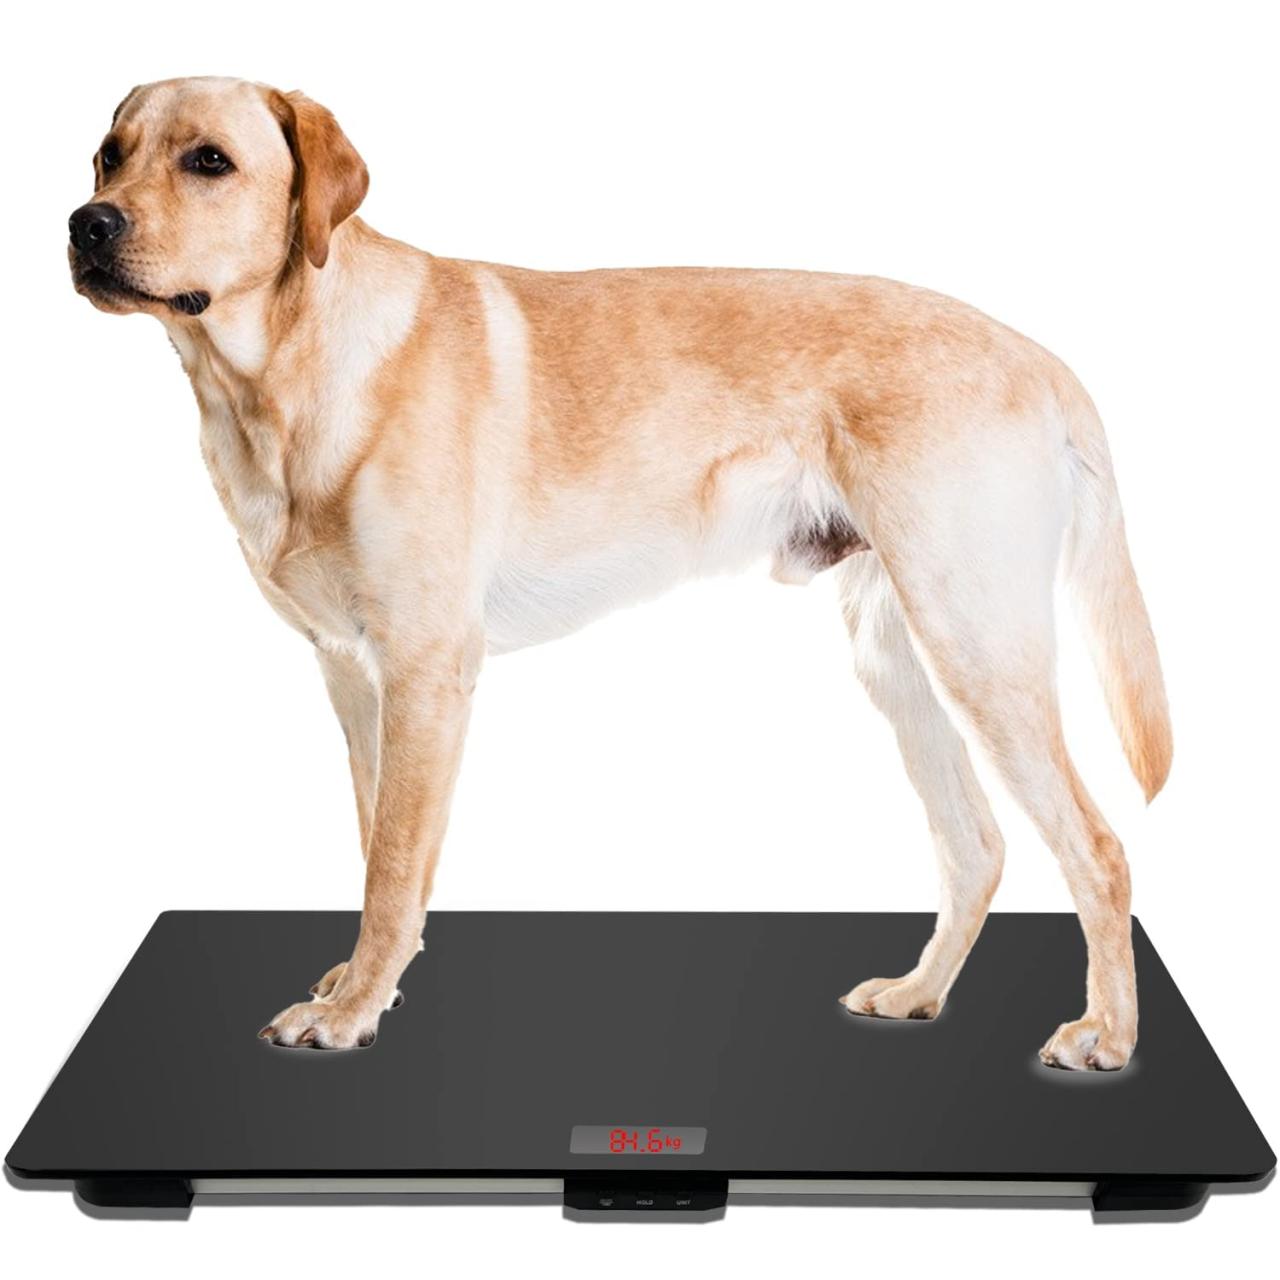 Amazon.Com: Mindpet-Med Pet Scale For Large Dog, Veterinary Scale With  Non-Slip Mat, Platform Scale, Weight Capacity Up To 220Lbs, With Tare/Hold,  31.5X 19.7 Inches, Size L, Black : Pet Supplies